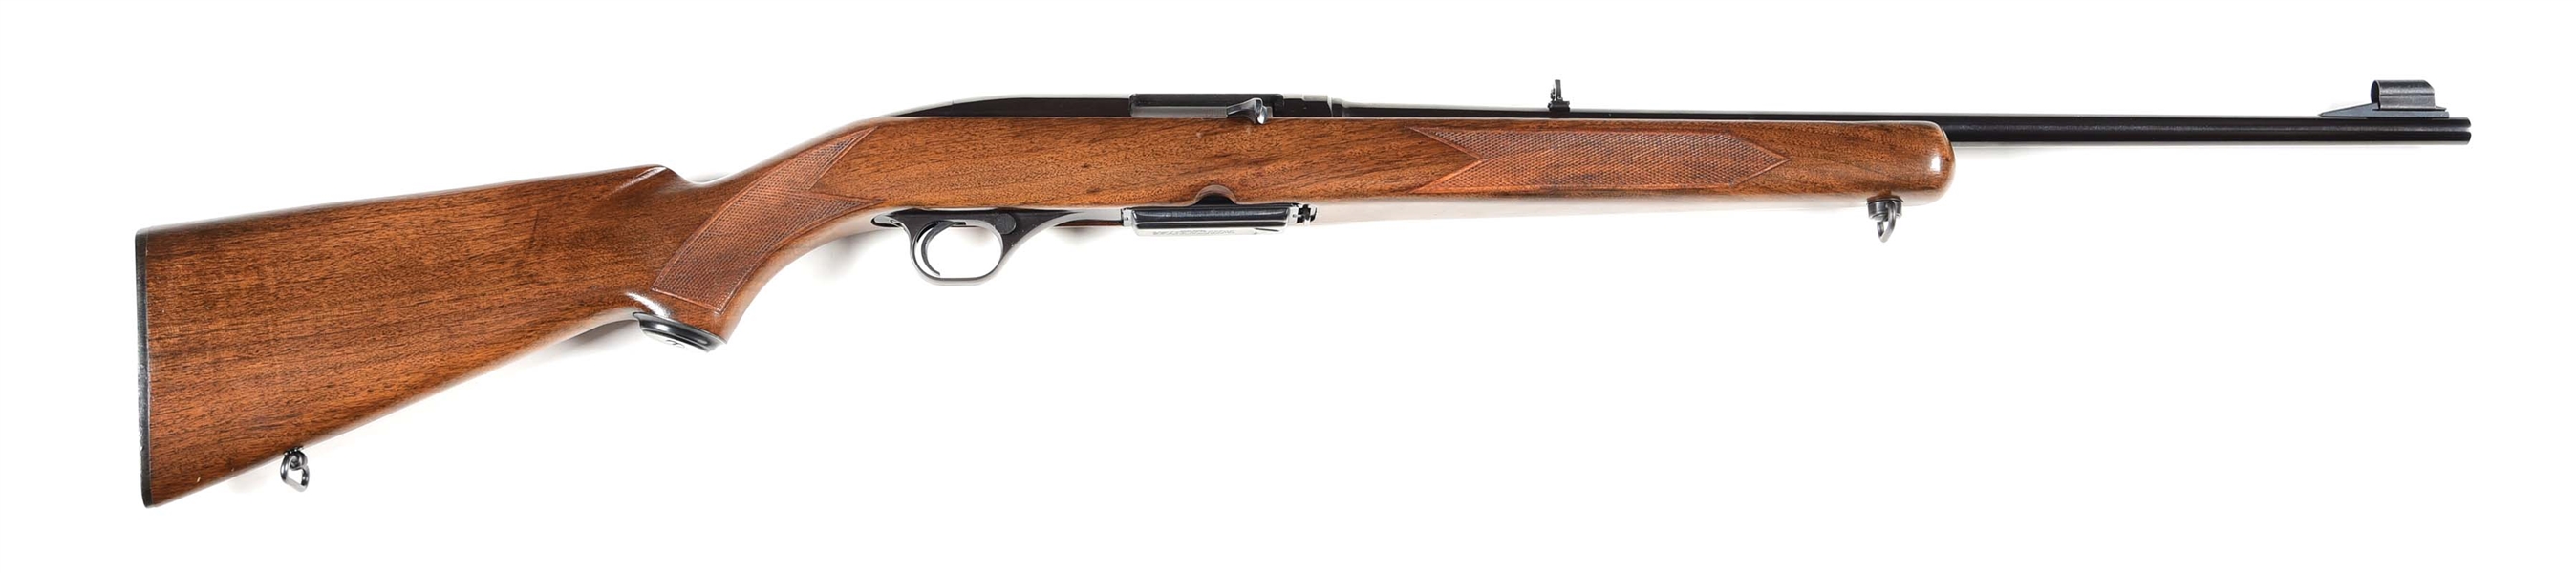 (C) FIRST YEAR PRODUCTION WINCHESTER MODEL 100 SEMI AUTOMATIC RIFLE (1961).